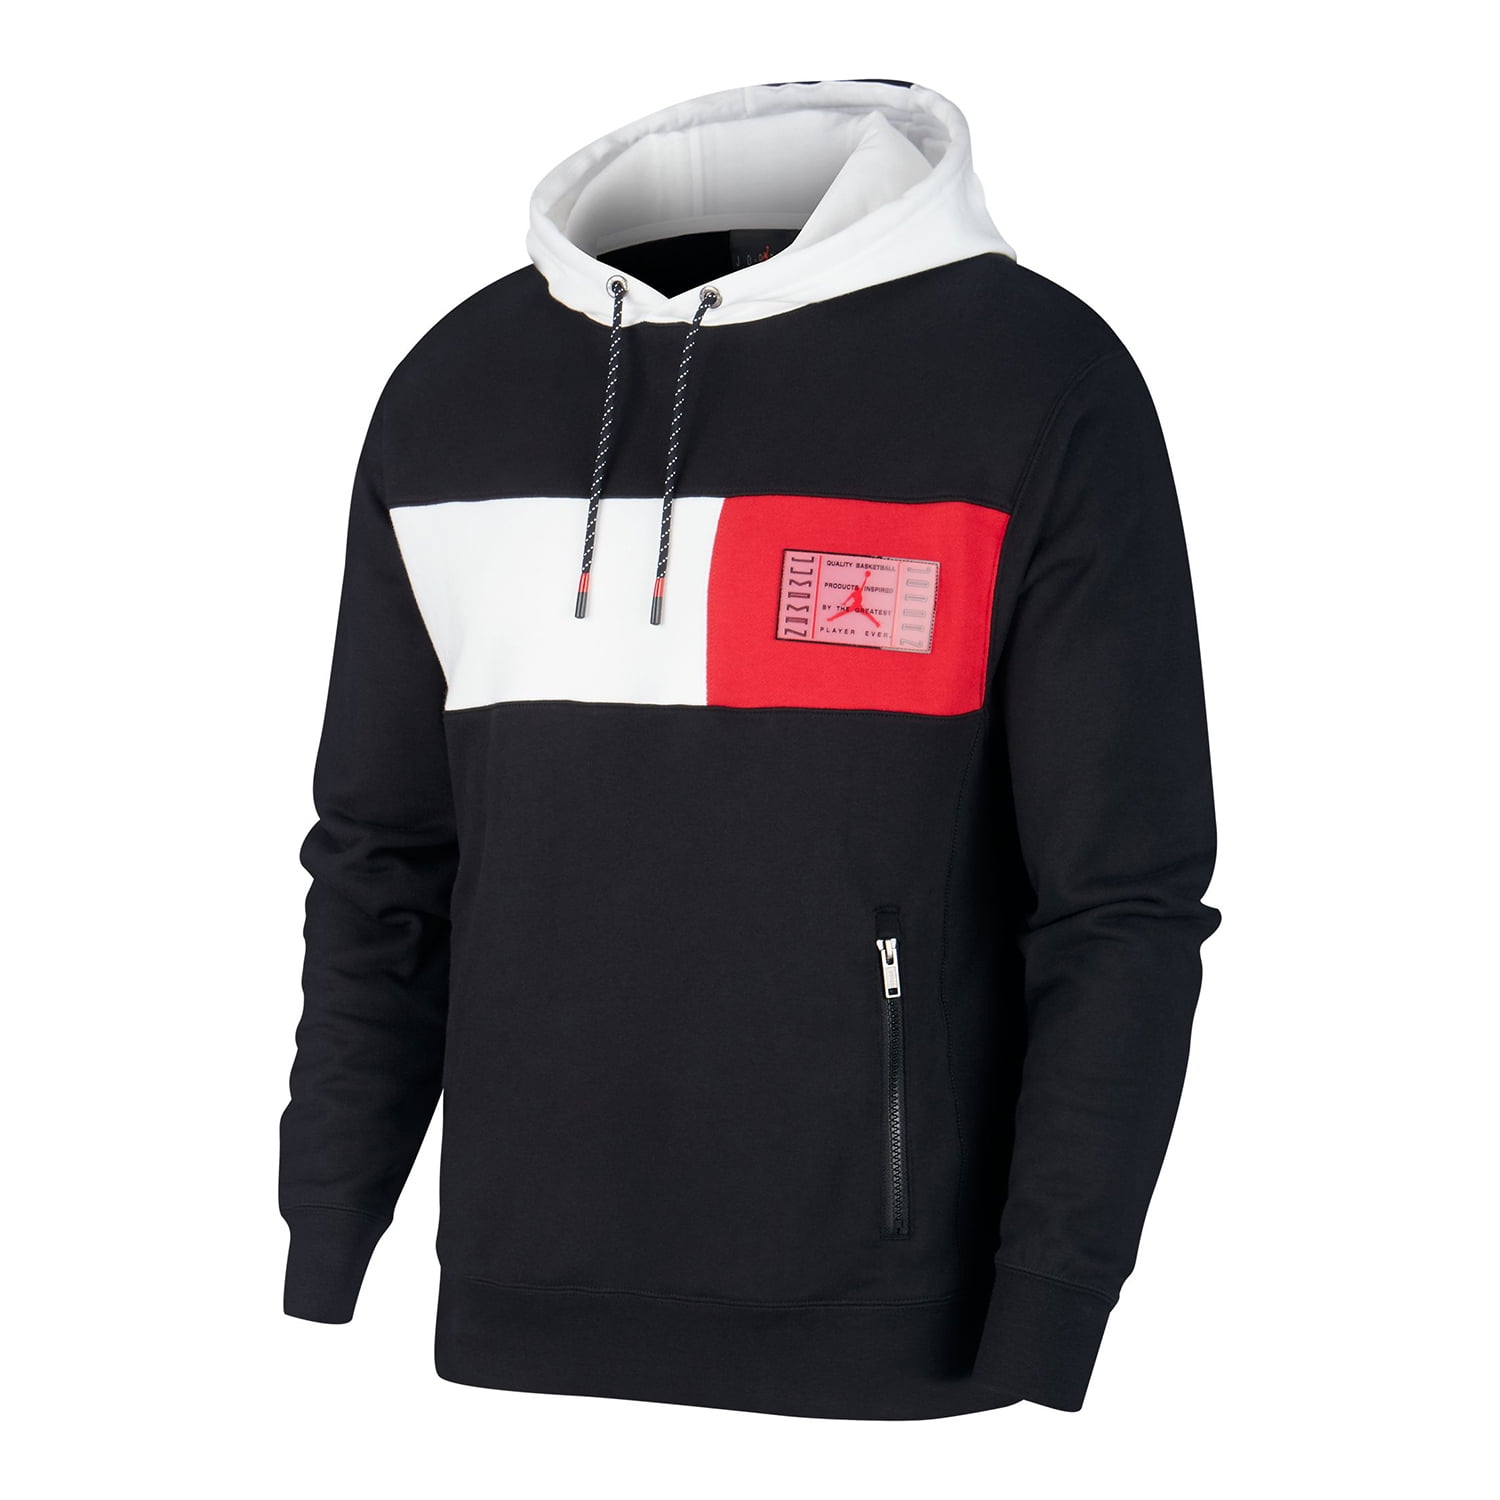 Pullover Hoodie Black-Gym Red-White 